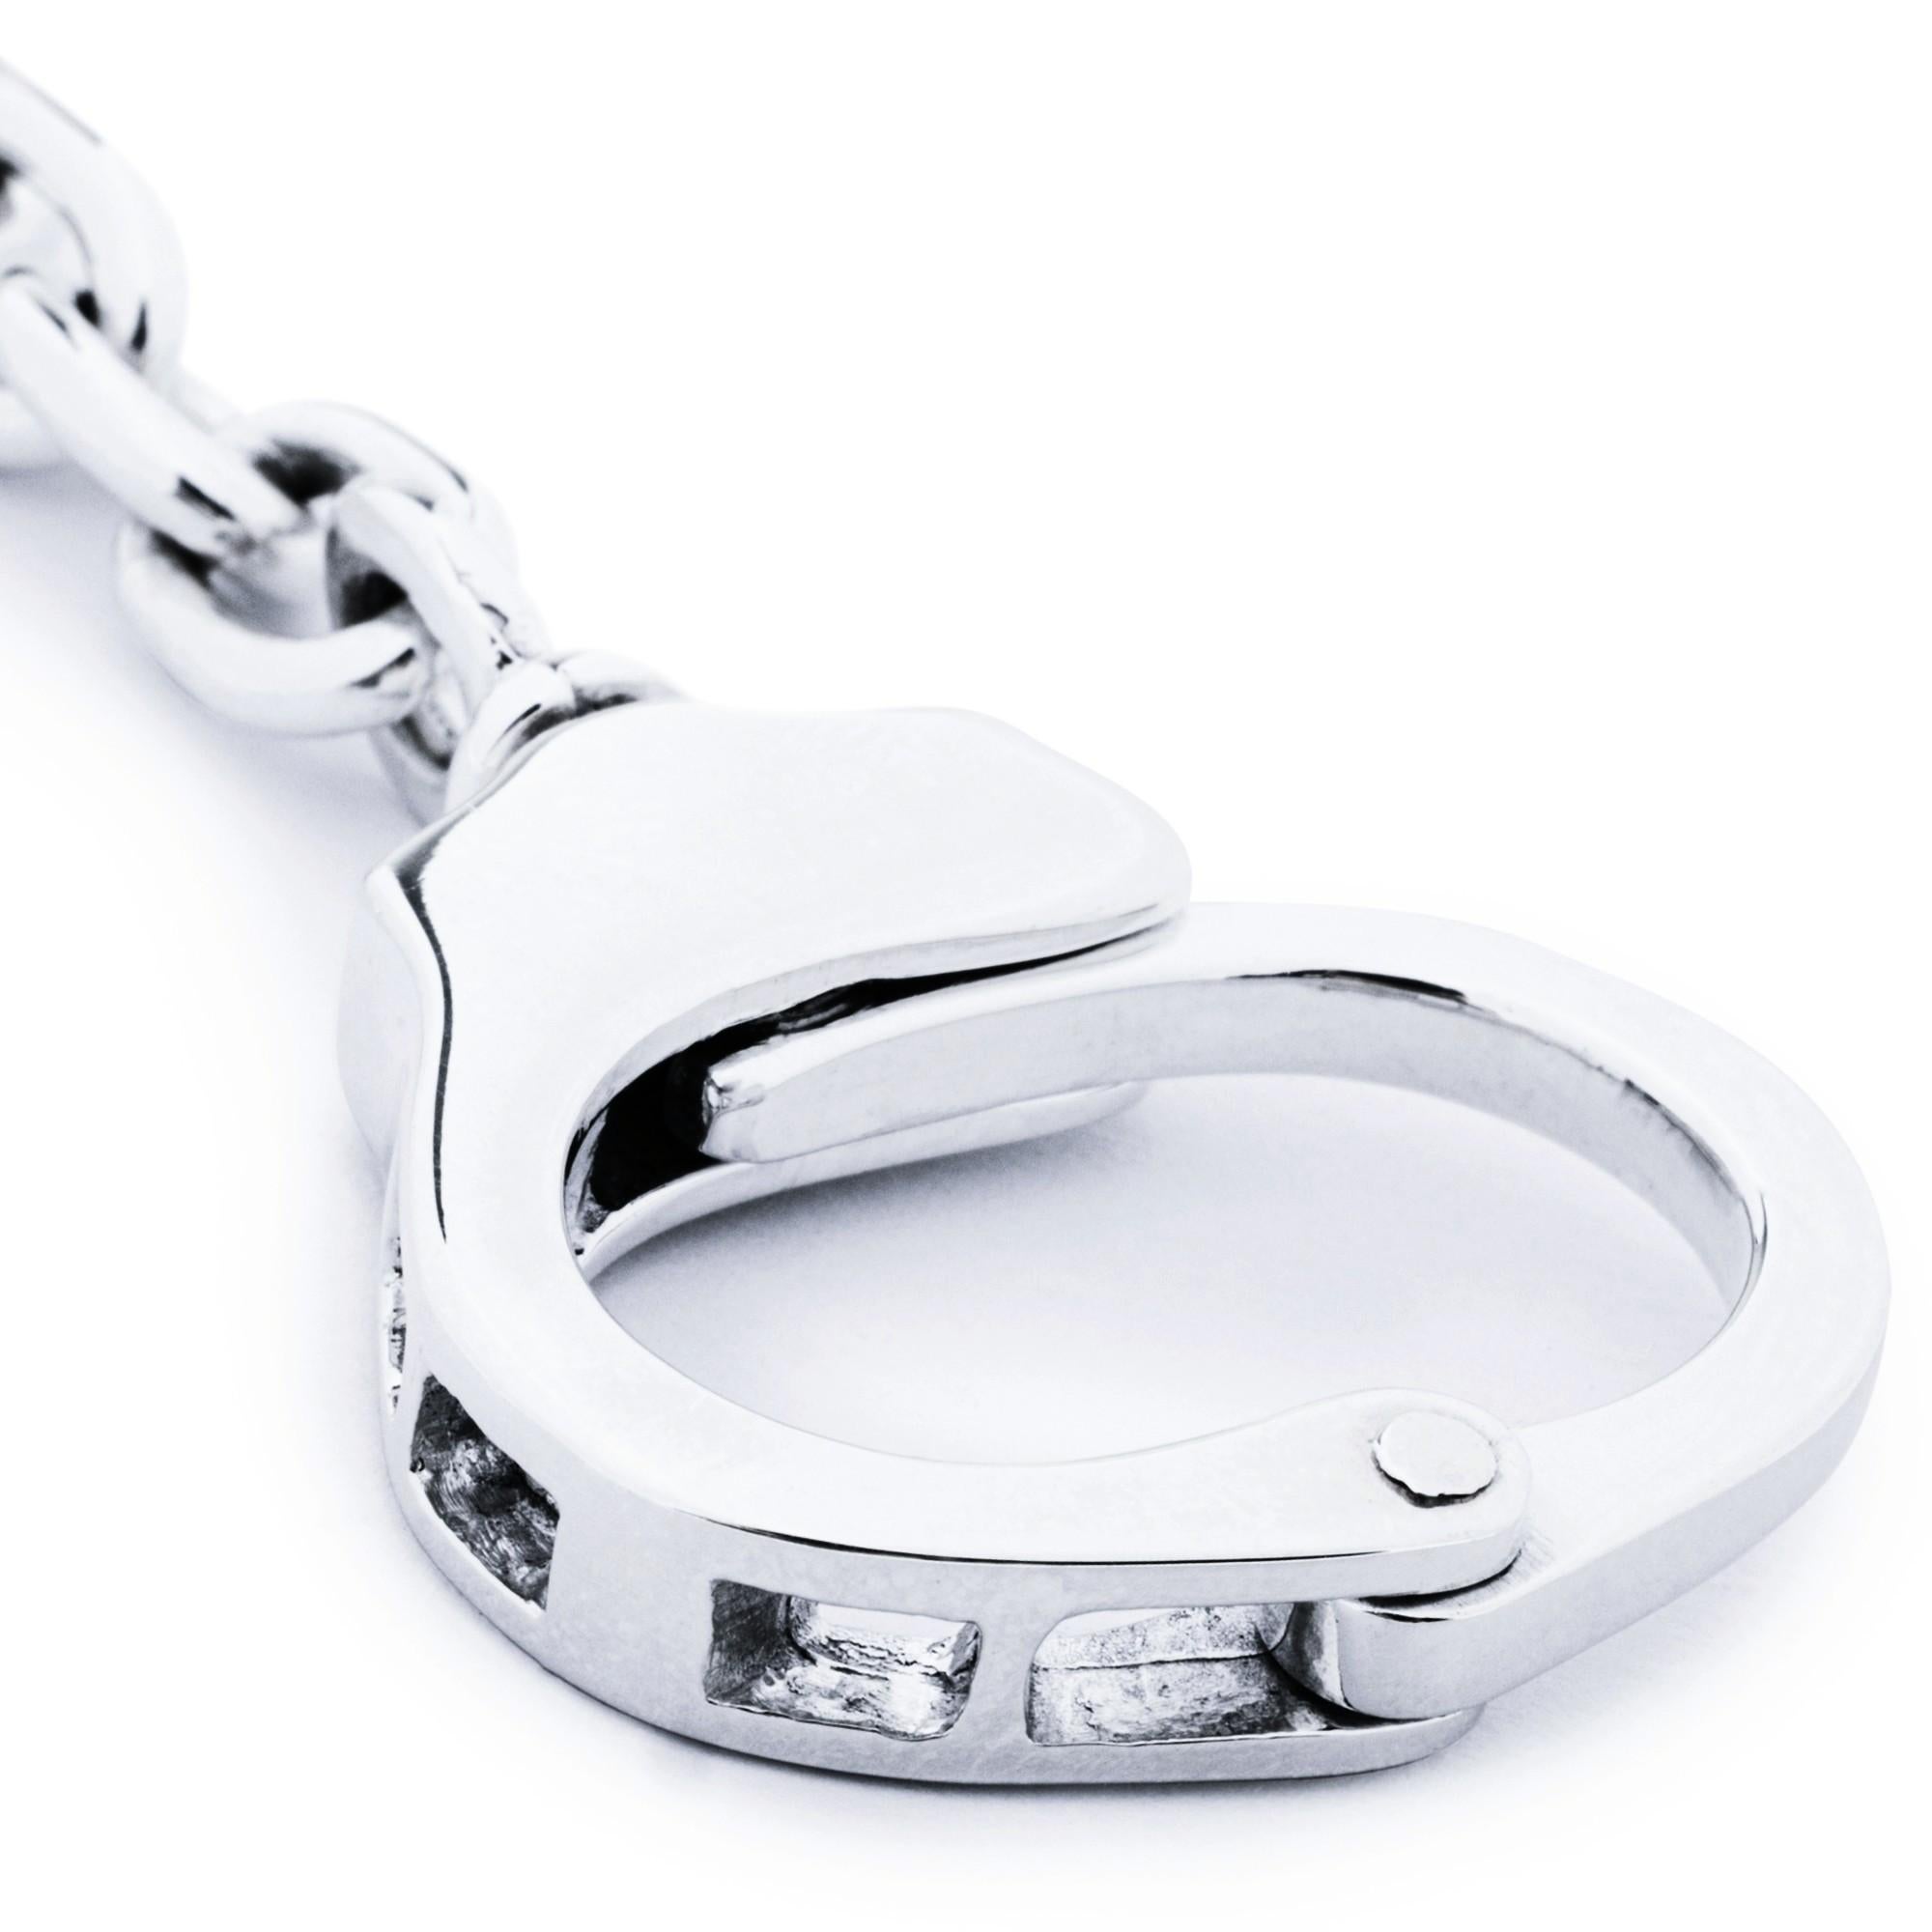 Alex Jona design collection, hand crafted in Italy, Sterling Silver Handcuffs key holder.
Alex Jona gifts stand out, not only for their special design and for the excellent quality, but also for the careful attention given to details during all the